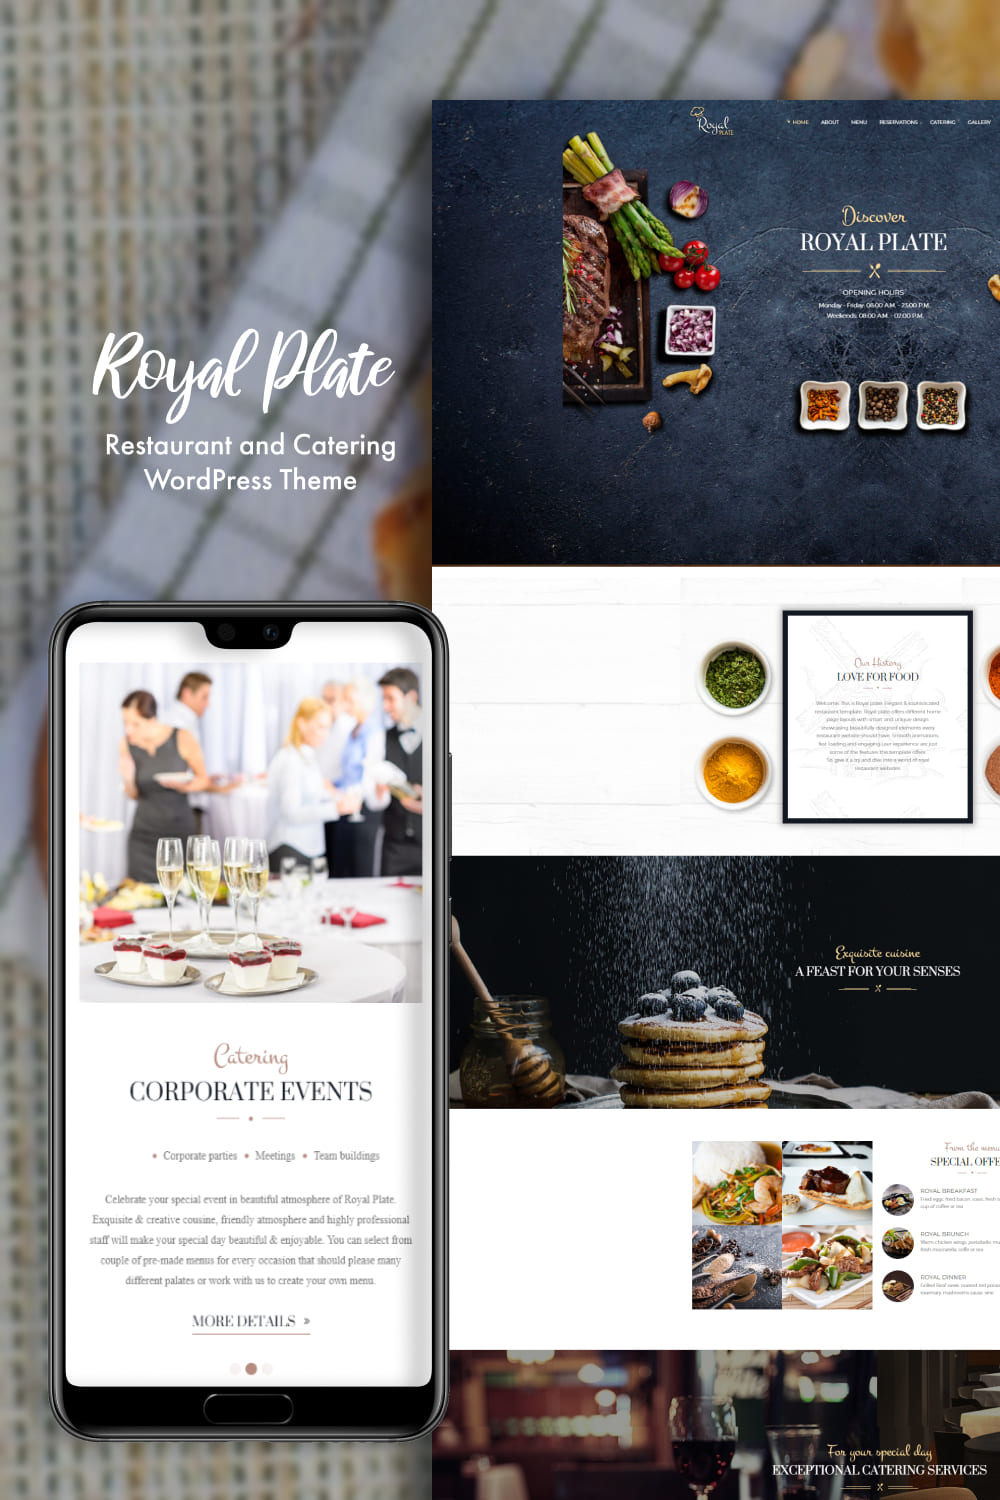 Preview Royal Plate - Restaurant and Catering WordPress Theme on the mobile.